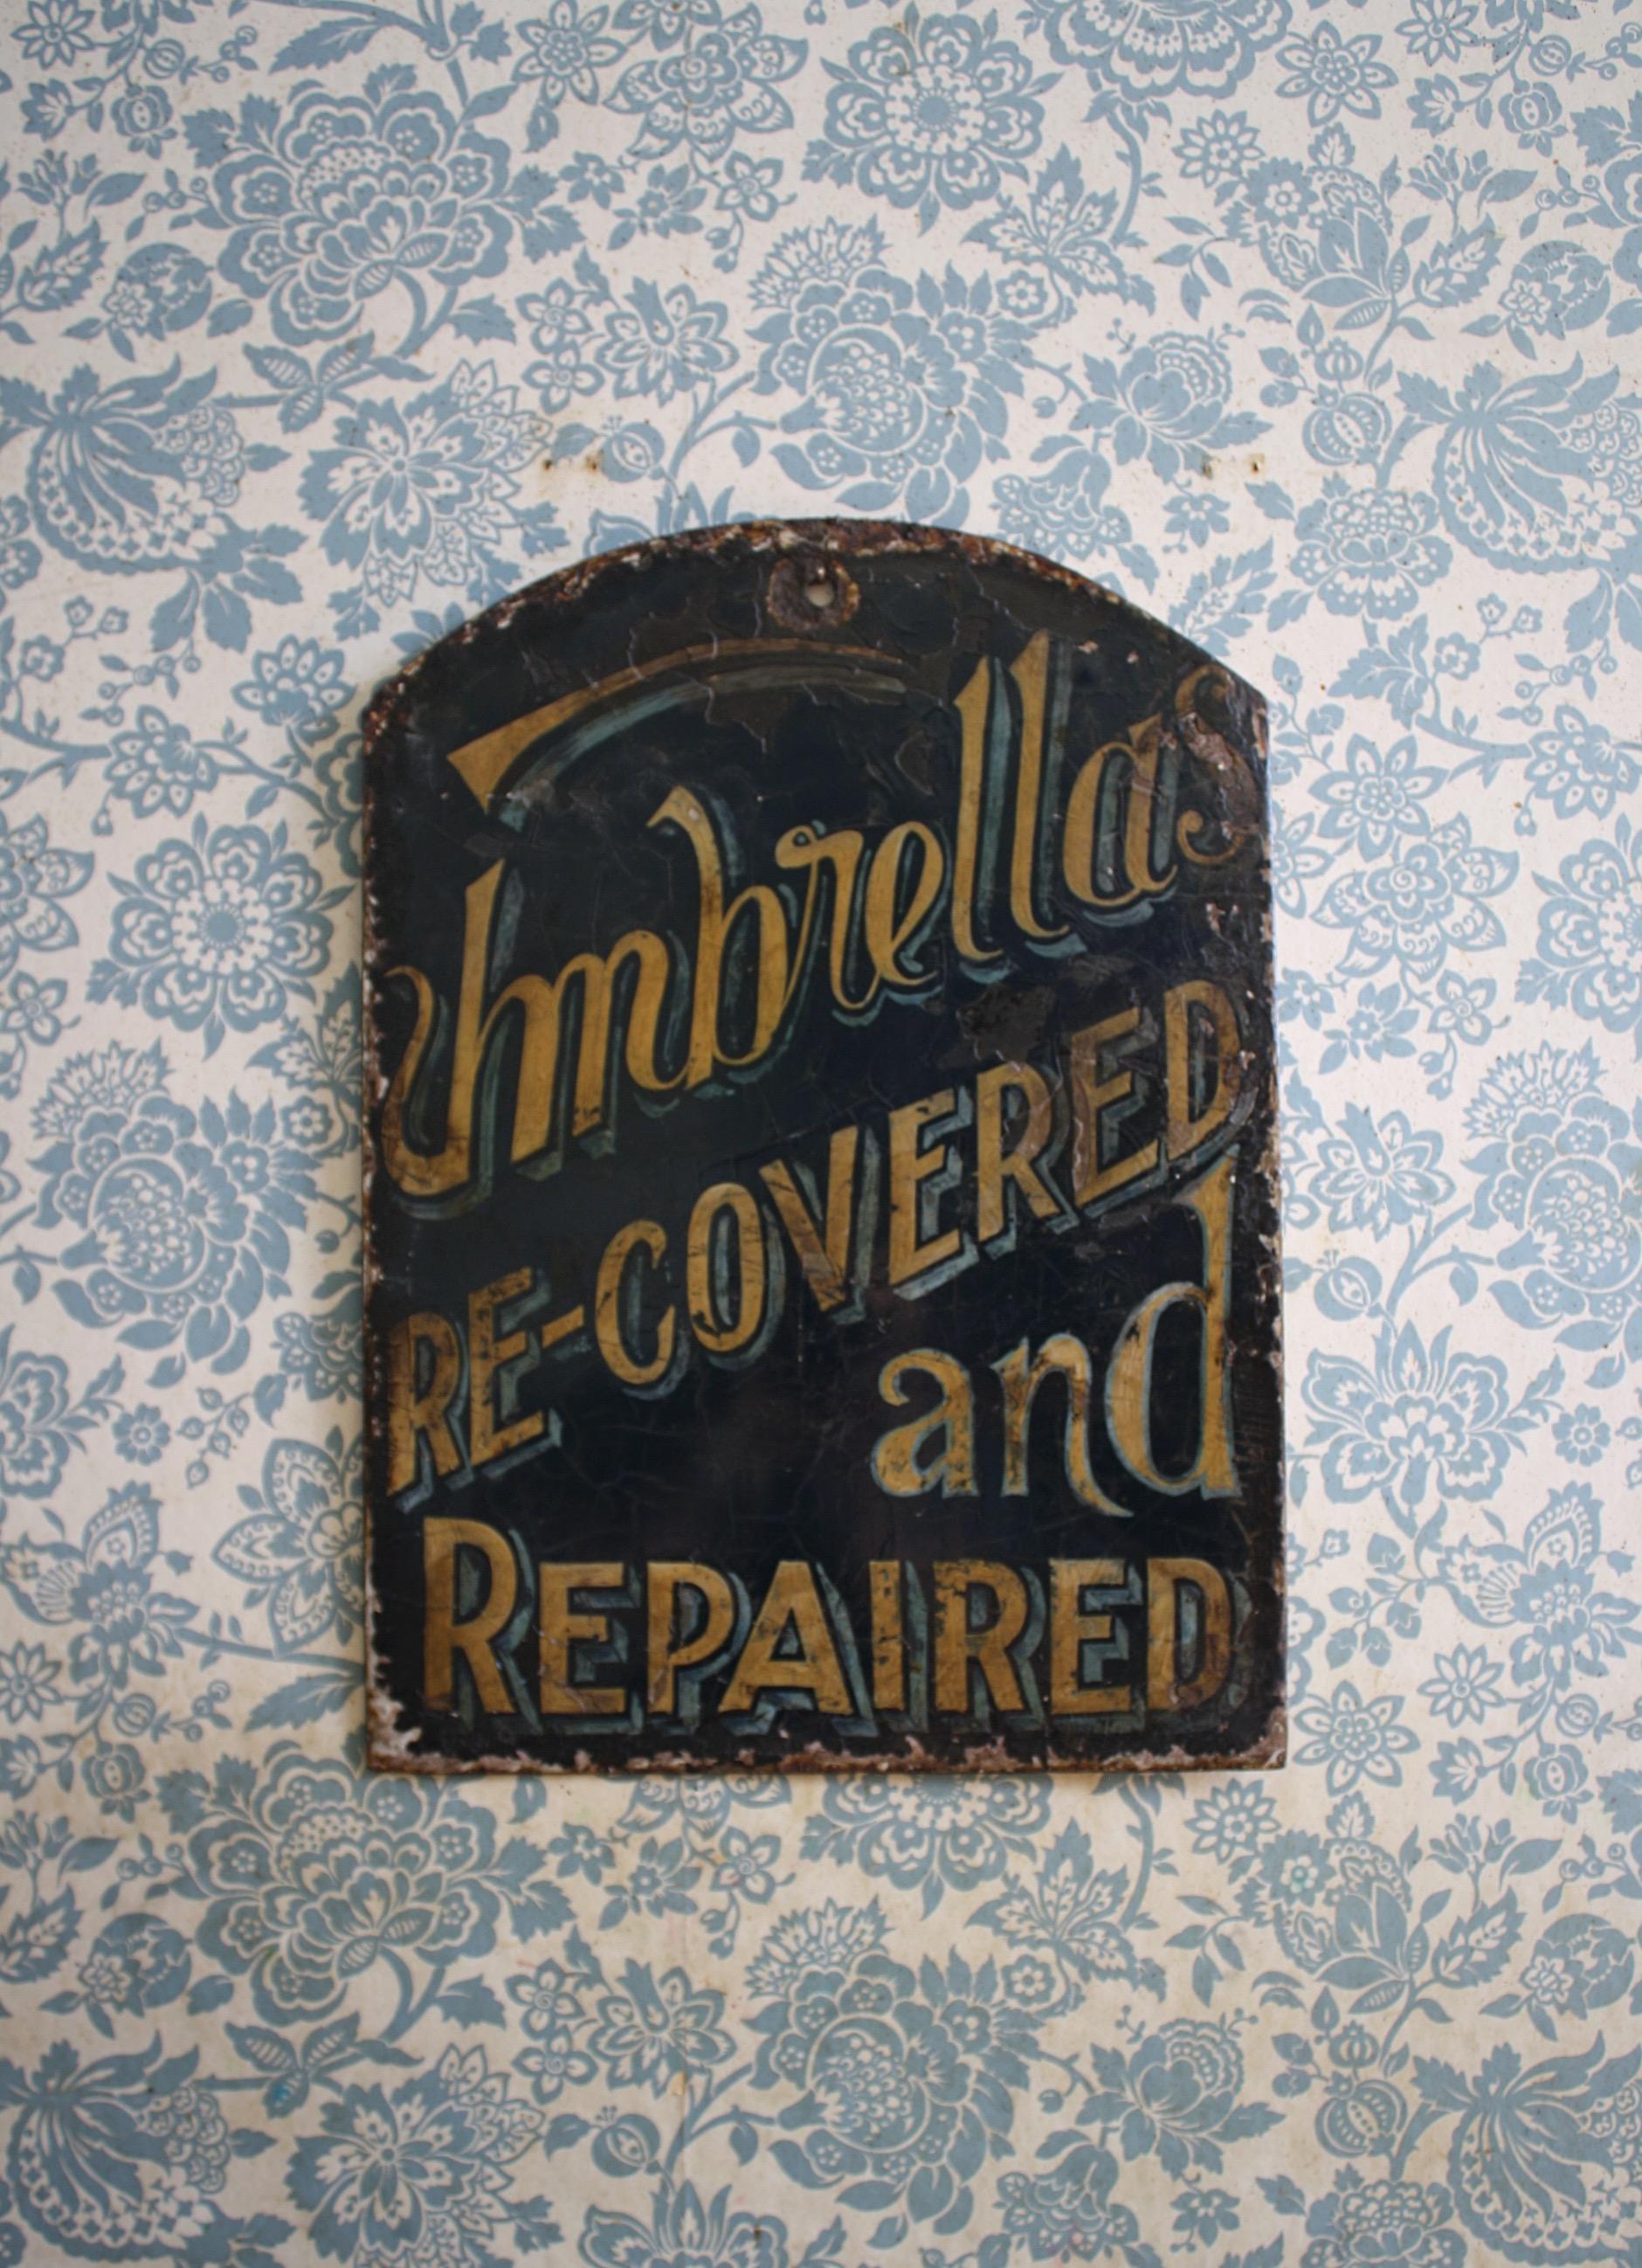 A atheistical pleasing trade sign from the early part of the 20th century. 

On a dark blue ground with a contrasting yellow and light blue changing script in font perspective and size reads Umbrellas Re-Covered and Repaired.

This has been